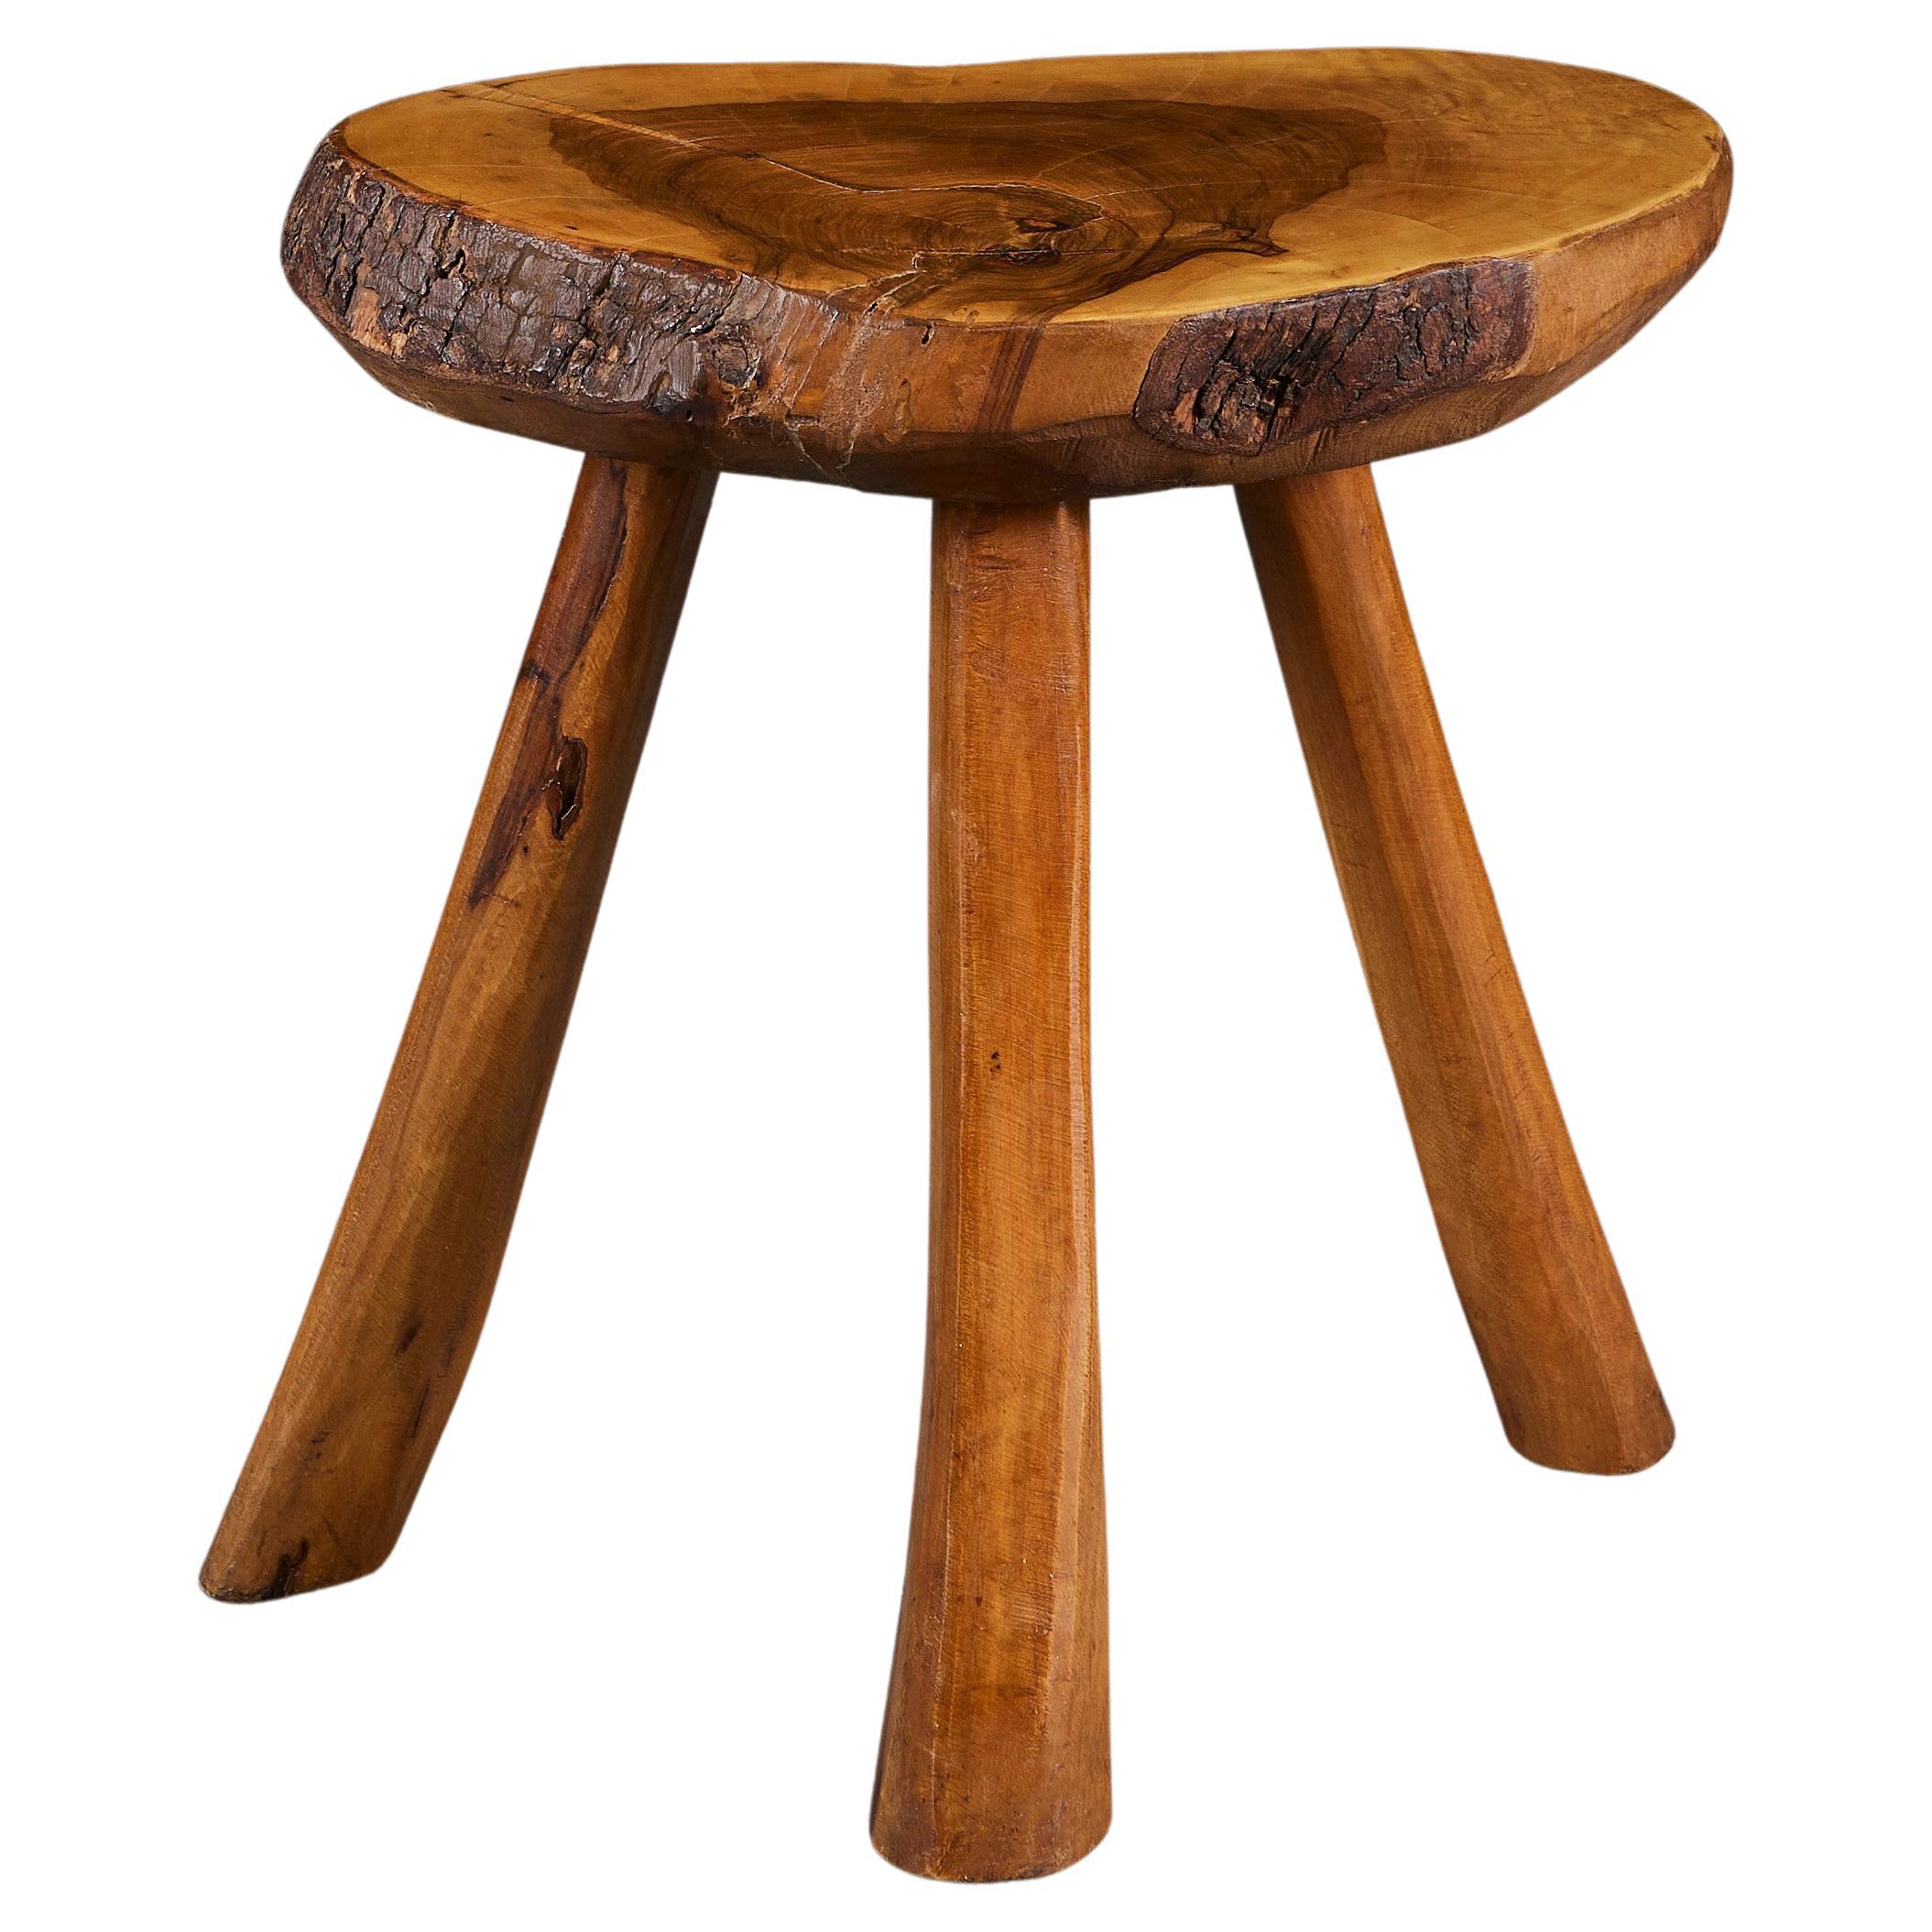 Rustic Elm Wood Cricket Table For Sale